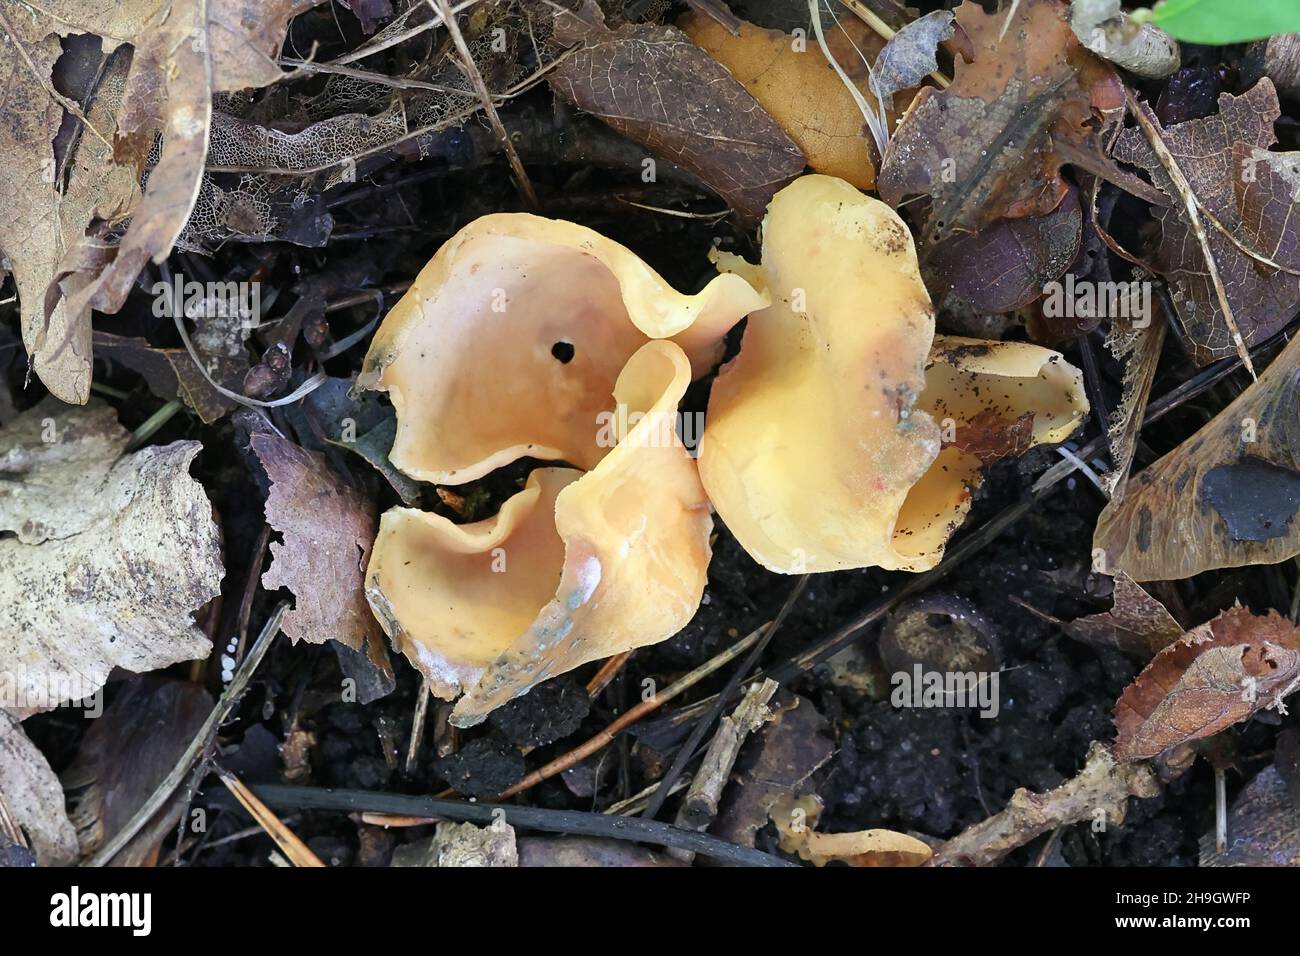 Otidea onotica, known as hare's ear, a rabbit-ear fungus from Finland Stock Photo